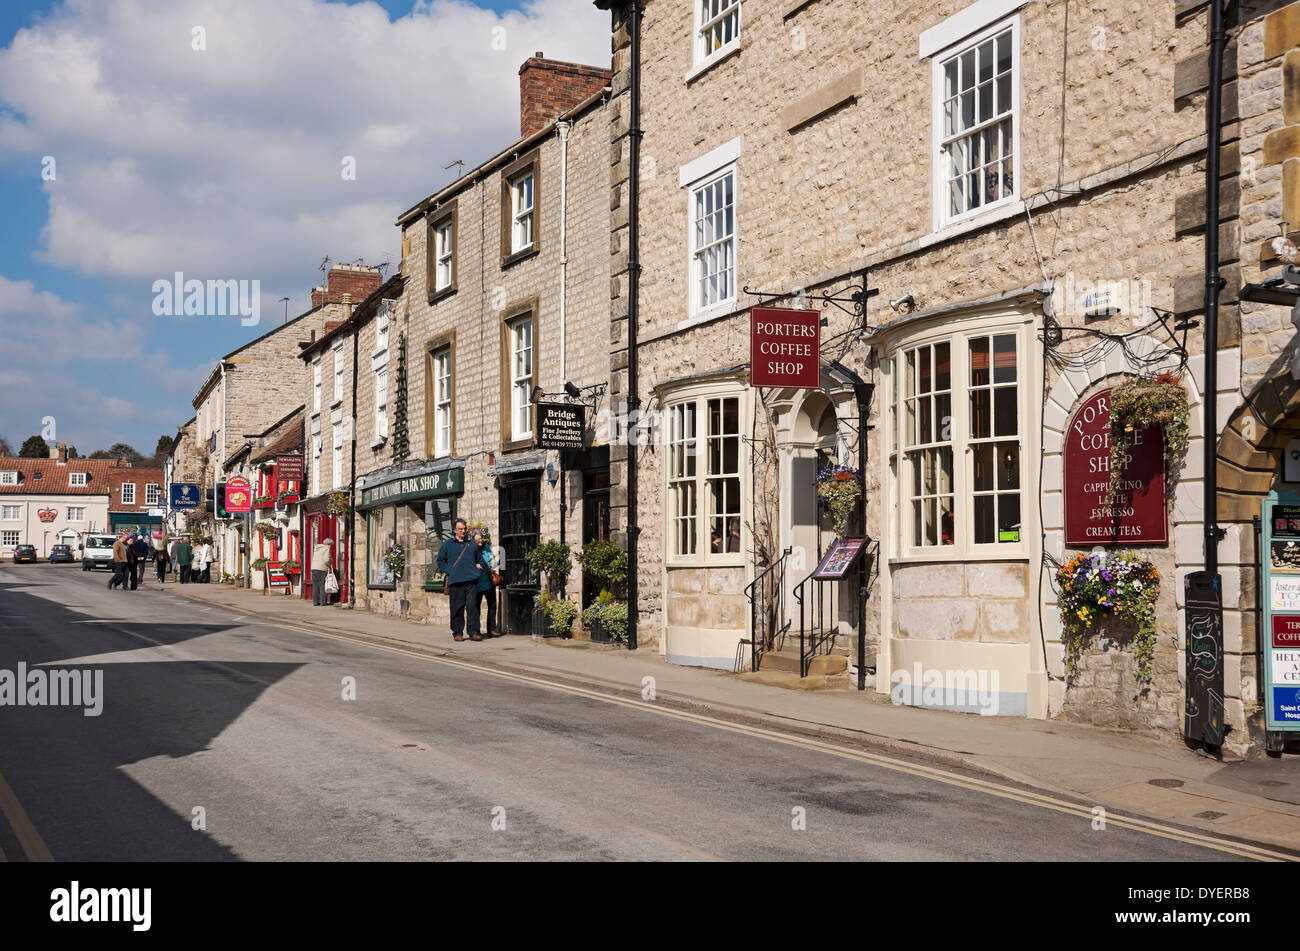 Shops stores in the town in spring Helmsley North Yorkshire England UK United Kingdom GB Great Britain Stock Photo